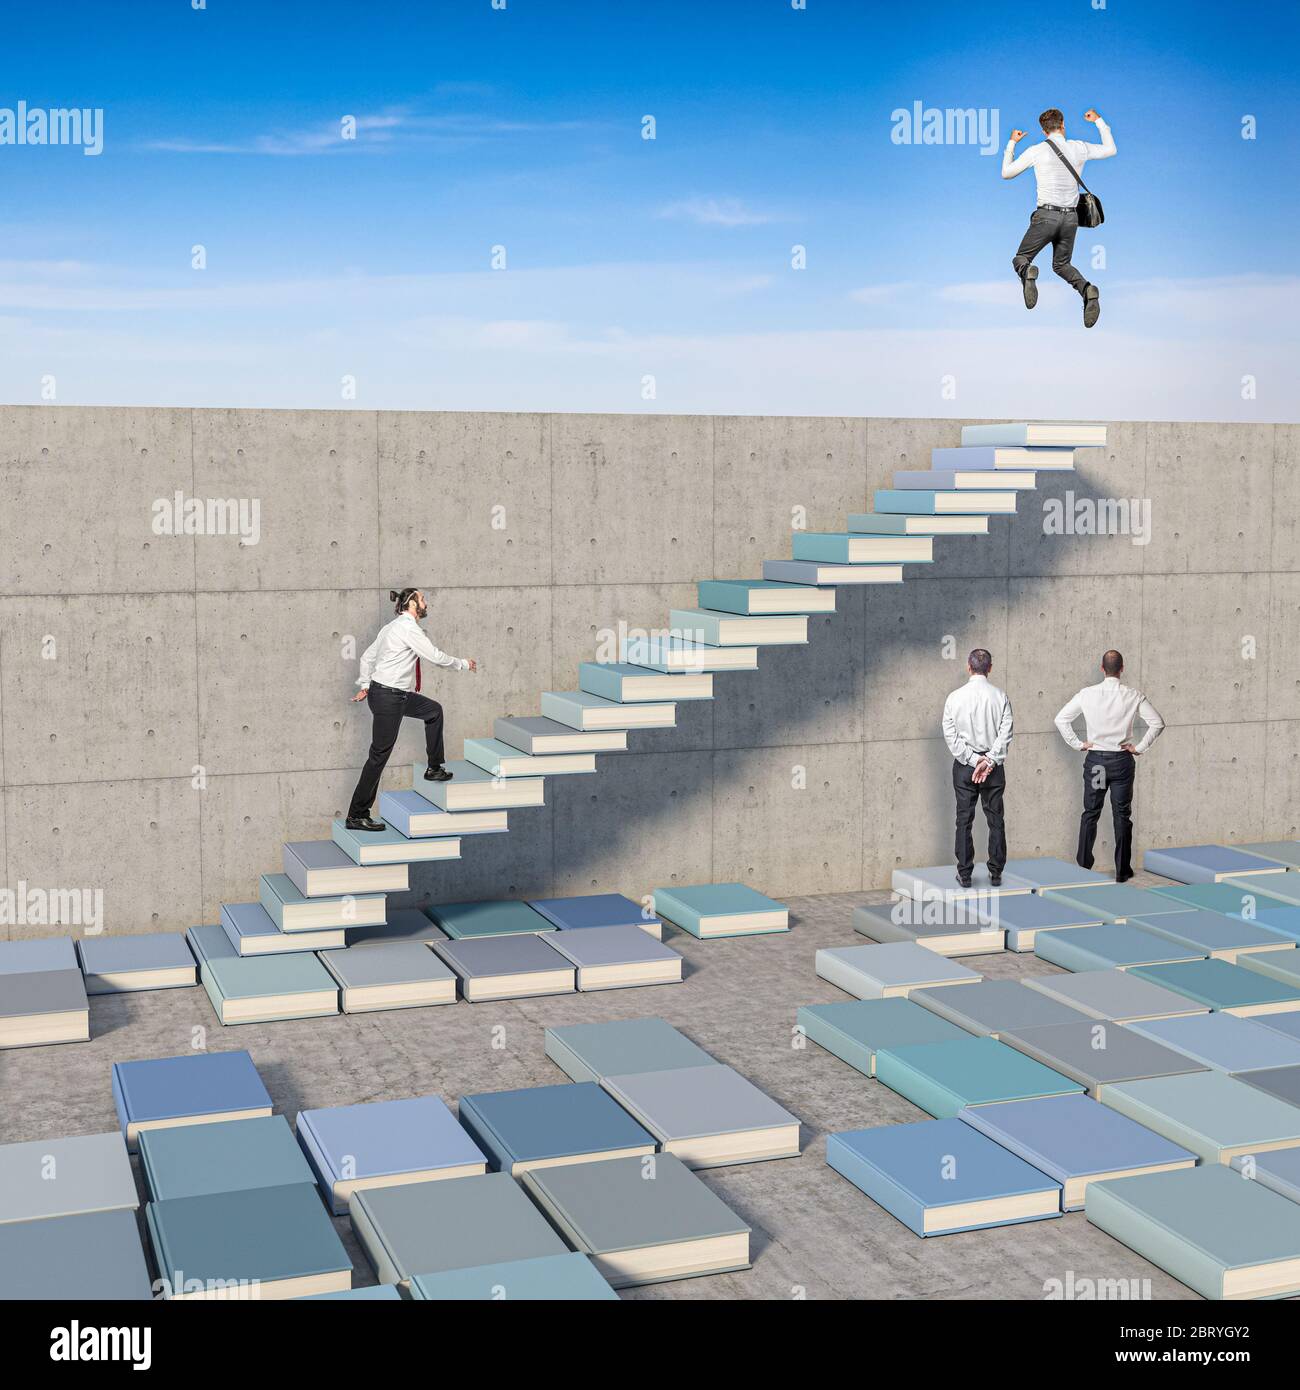 businesspeople, some of them have created a ladder with books on the ground to overcome the wall, others look at the wall. concept of creativity and o Stock Photo